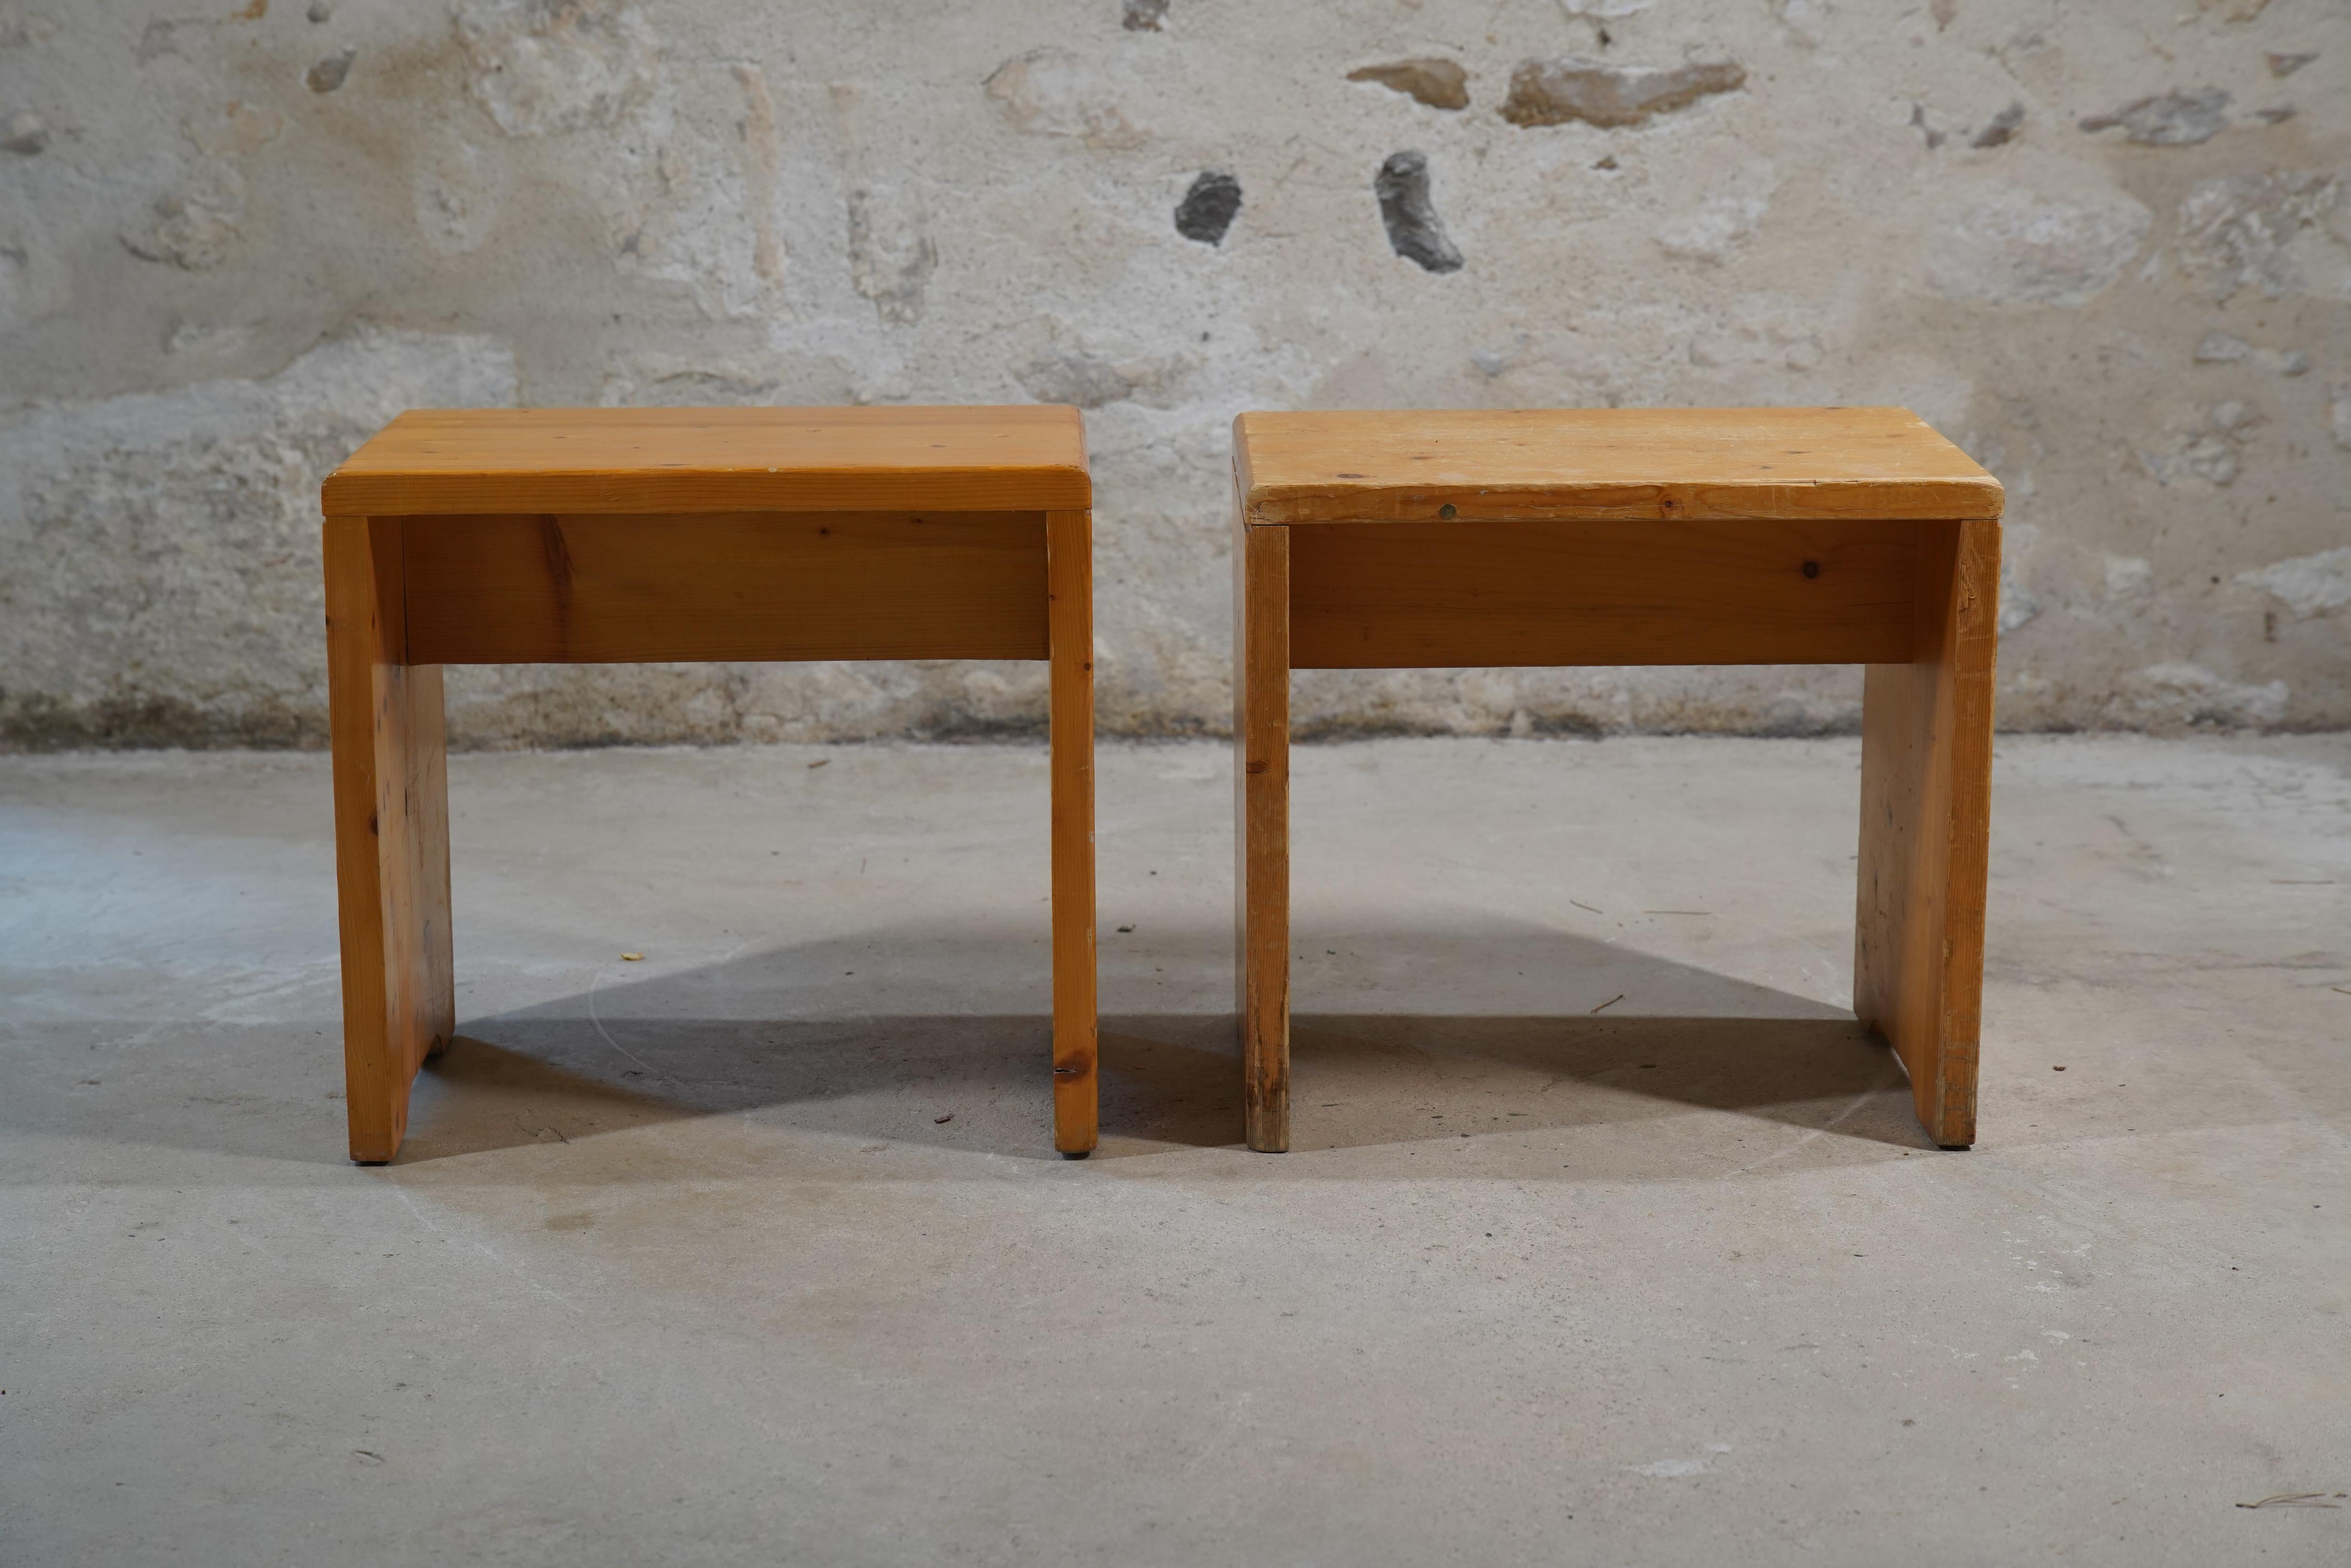 Charlotte Perriand Stools from Les Arcs, France circa 1968 (4 Available) For Sale 9